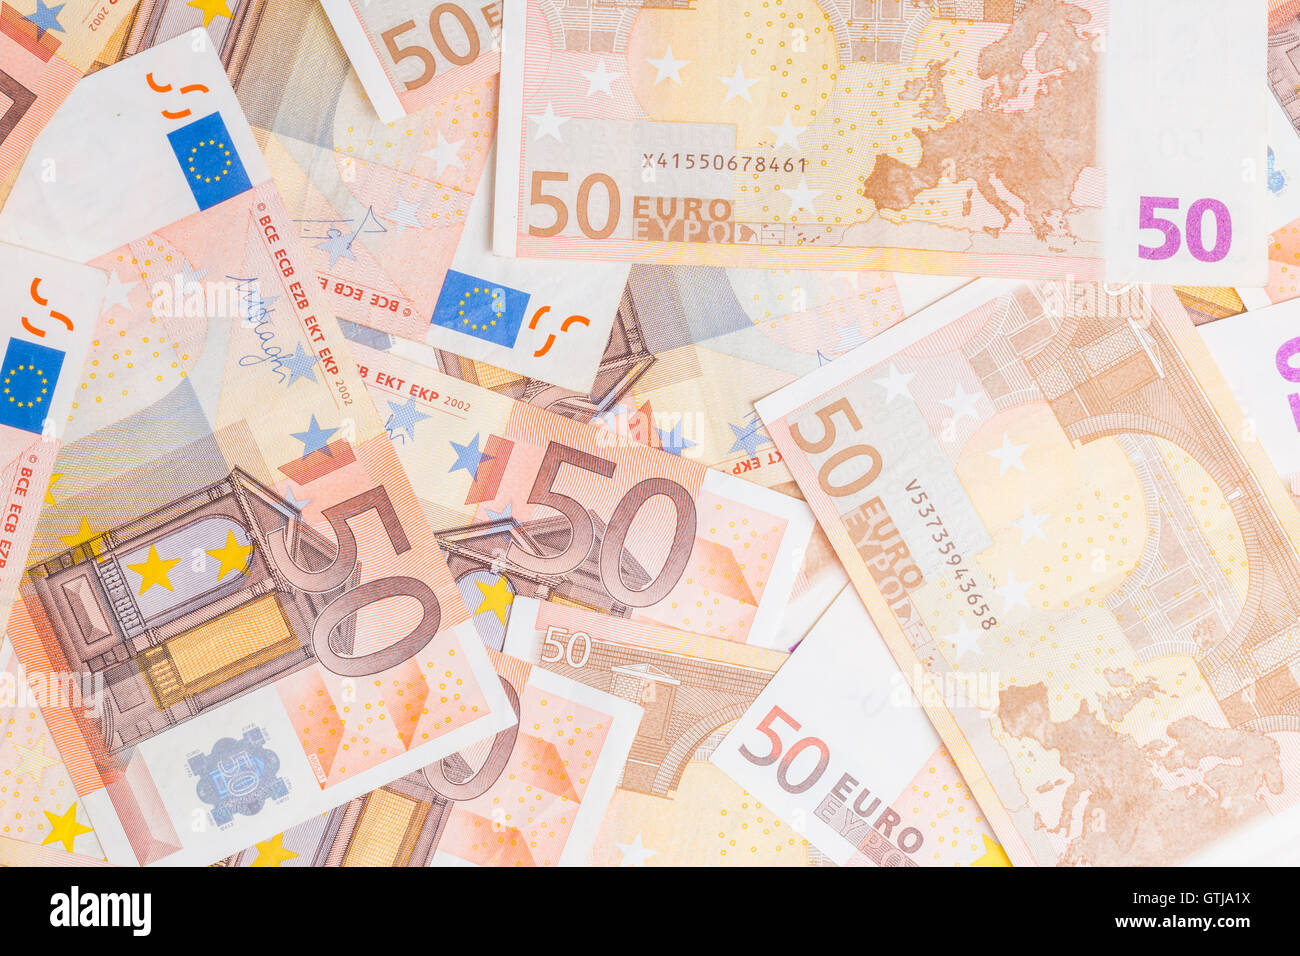 Closeup of a group of fifty euros banknote background Stock Photo